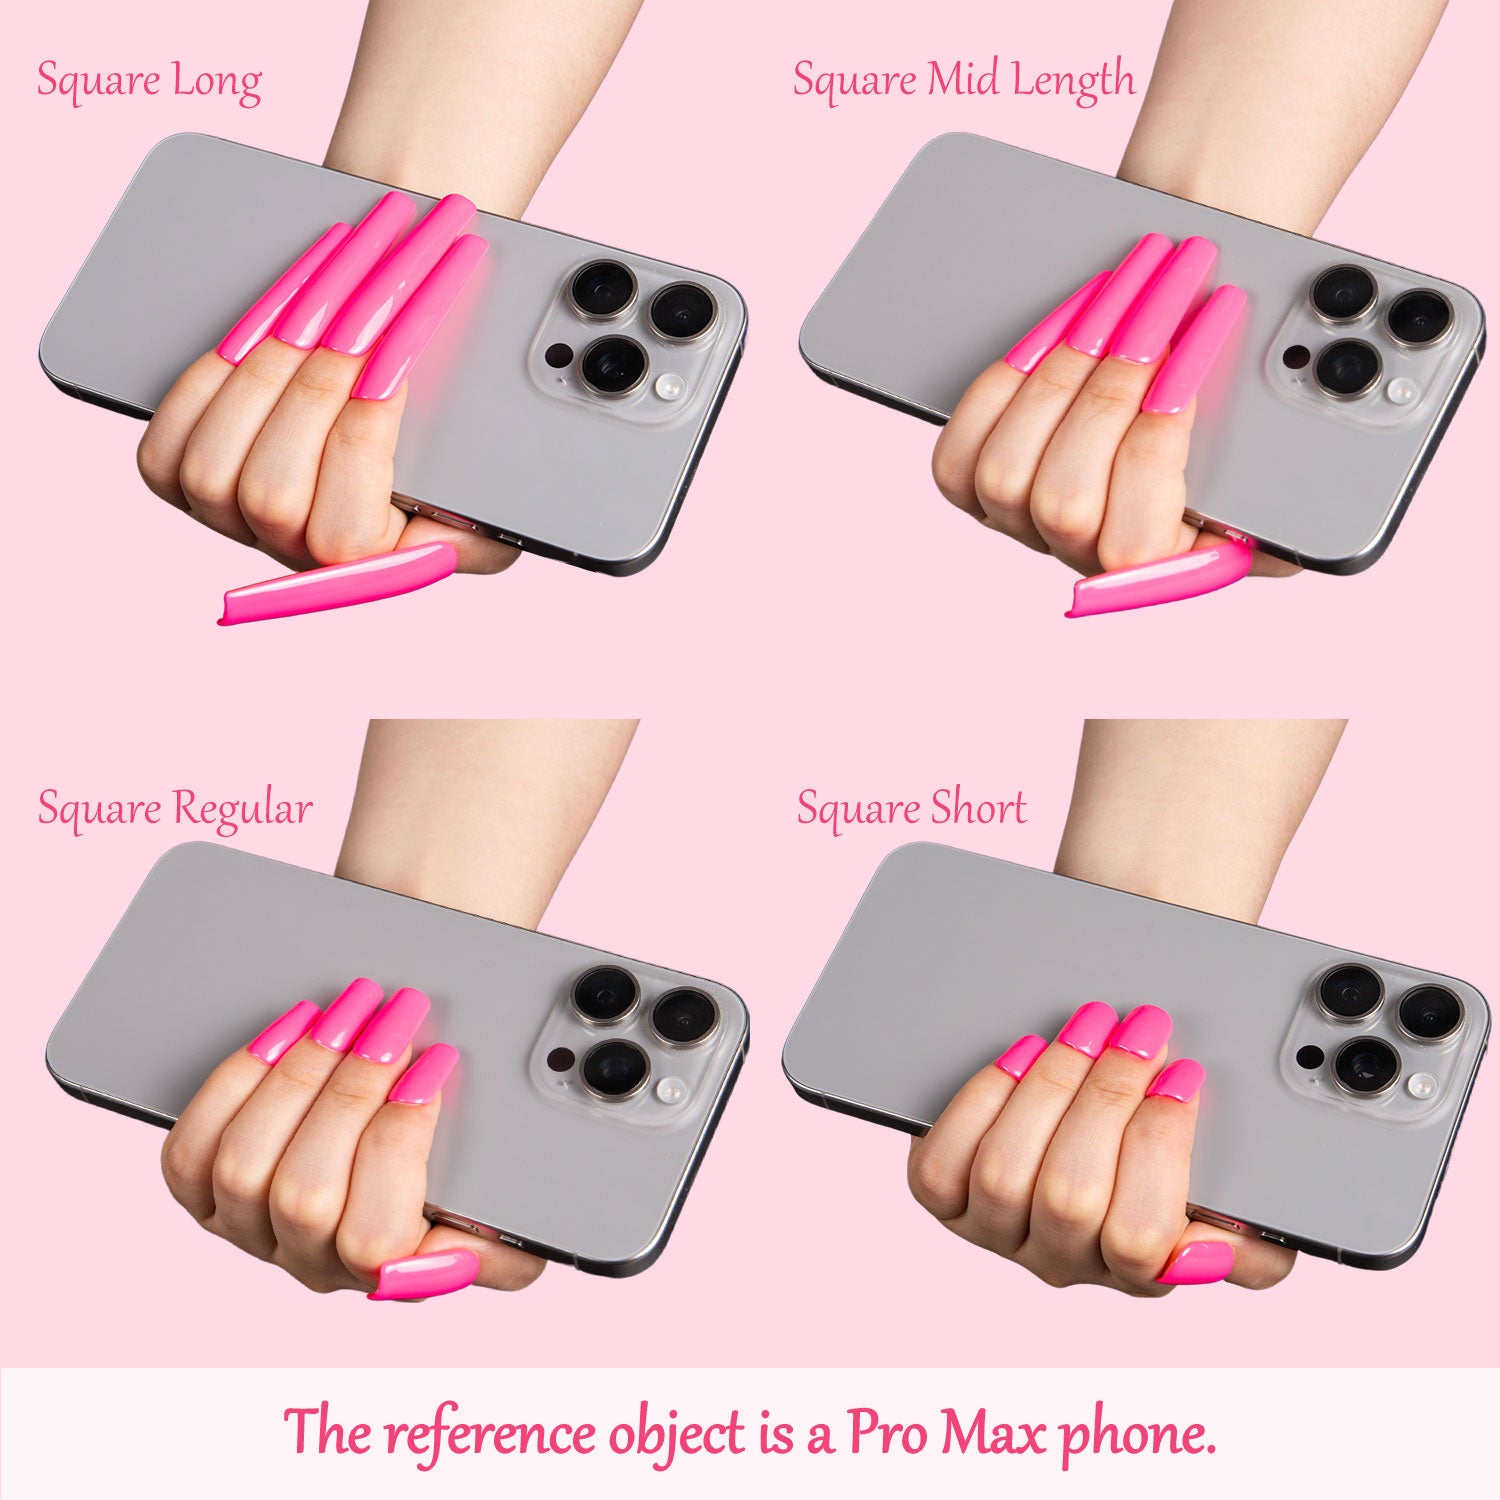 Comparison of pink square-shaped press-on nails in various lengths (Square Long, Square Mid Length, Square Regular, Square Short) holding a Pro Max phone.